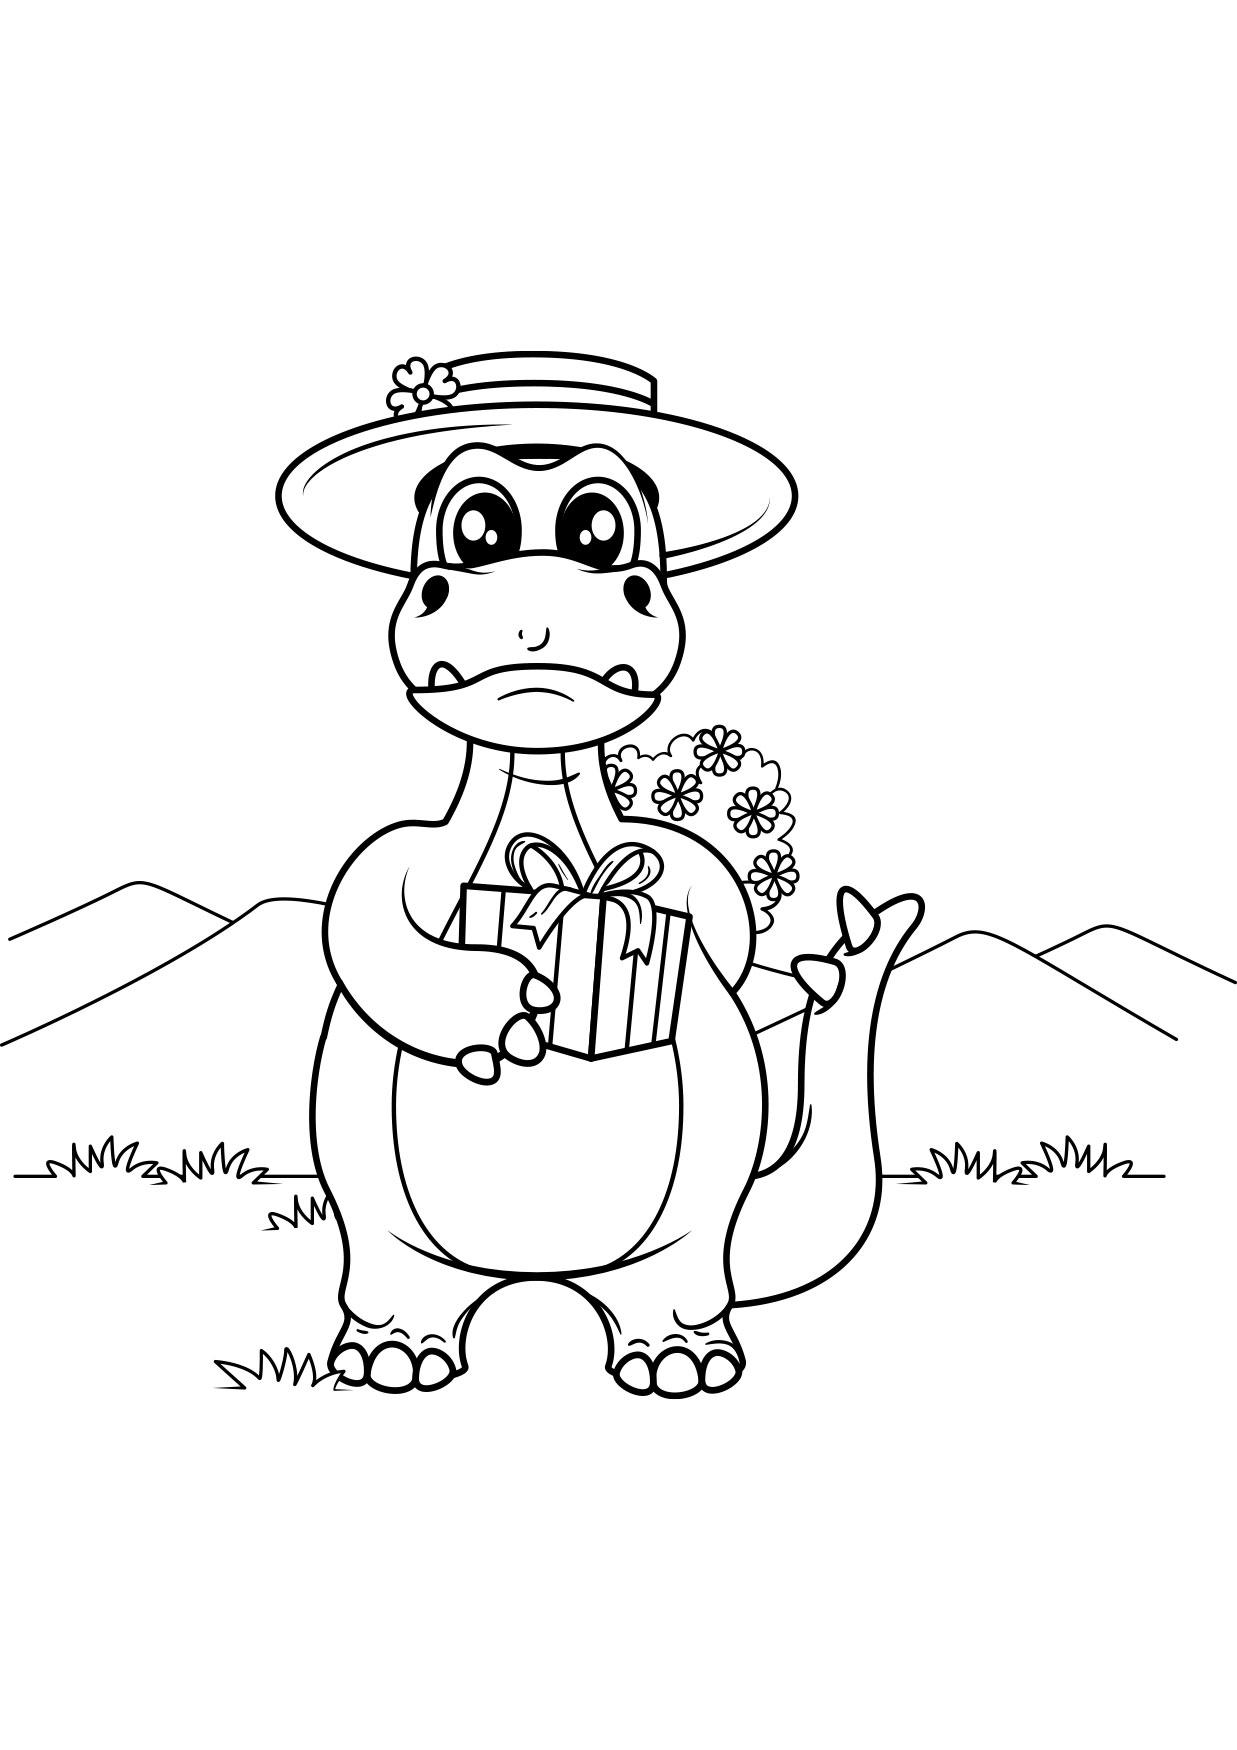 Coloring page dinosaur with gift